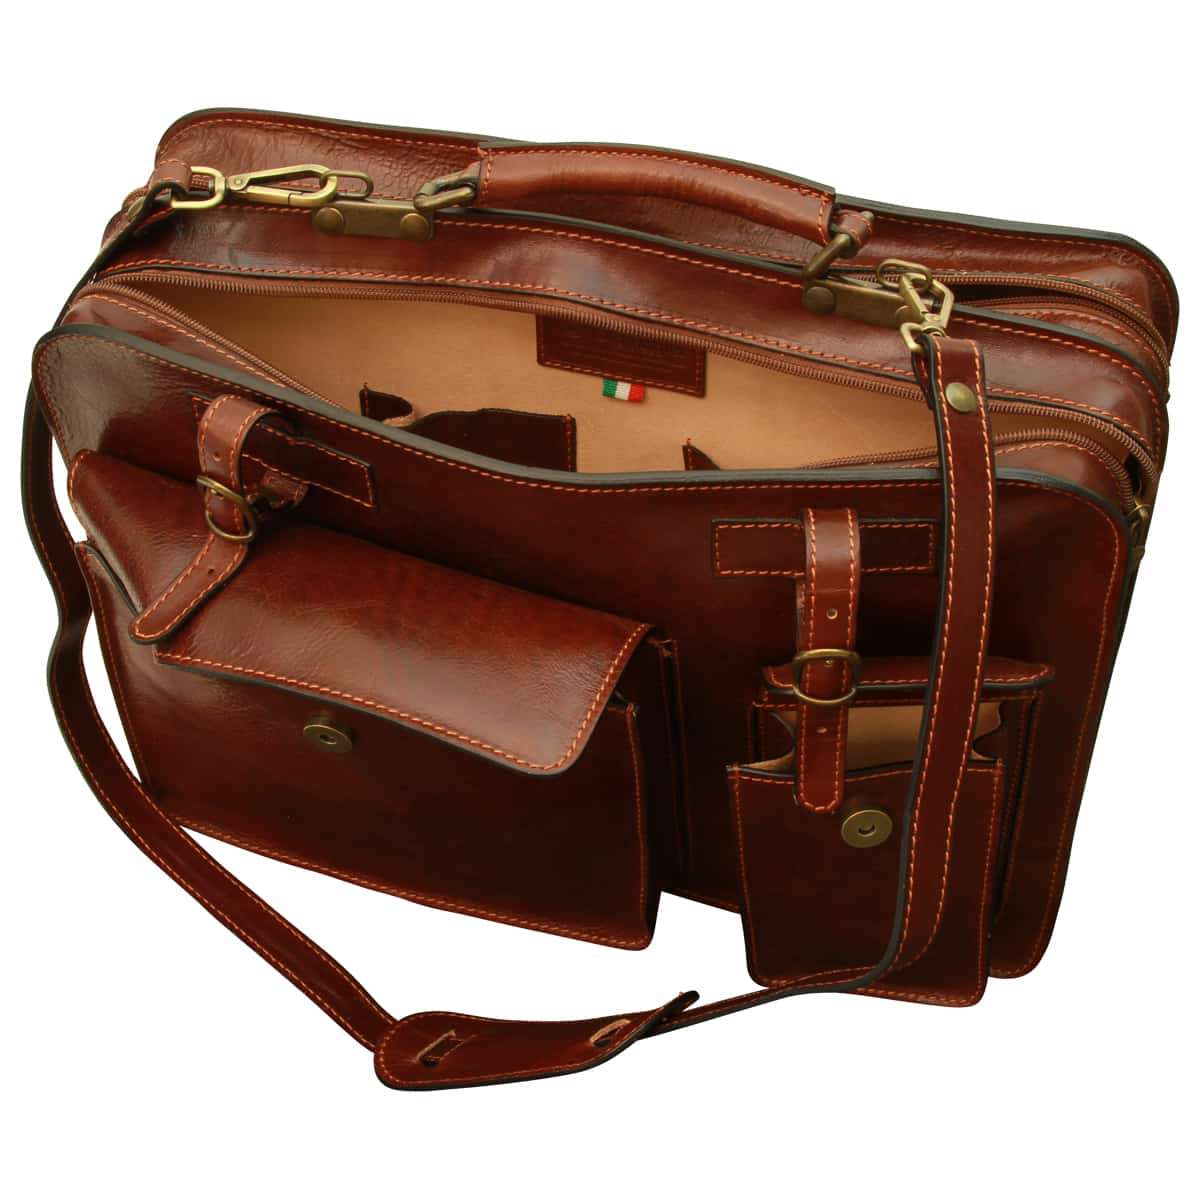 Leather Briefcase with belt straps - Brown | 006205MA UK | Old Angler Firenze